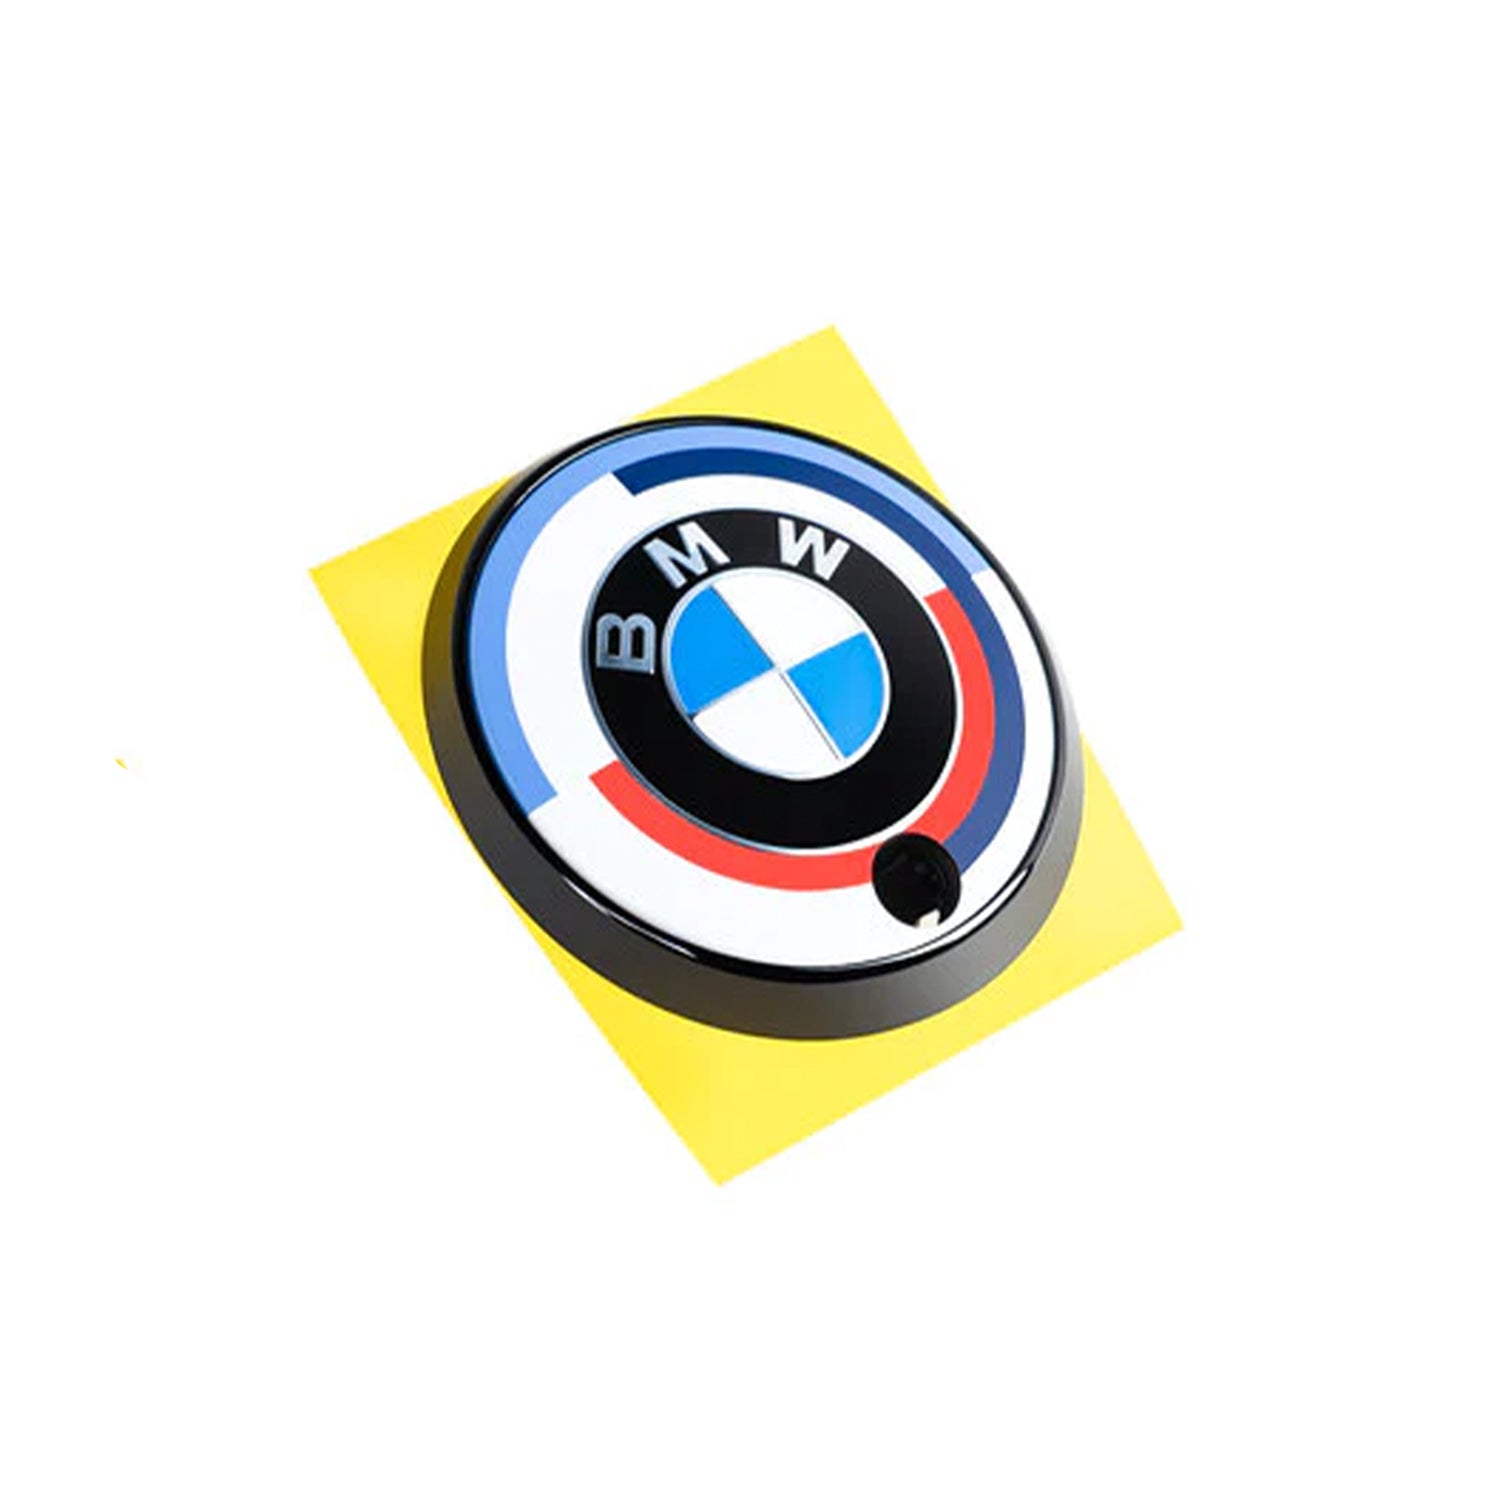 Genuine BMW: The Heritage Collection